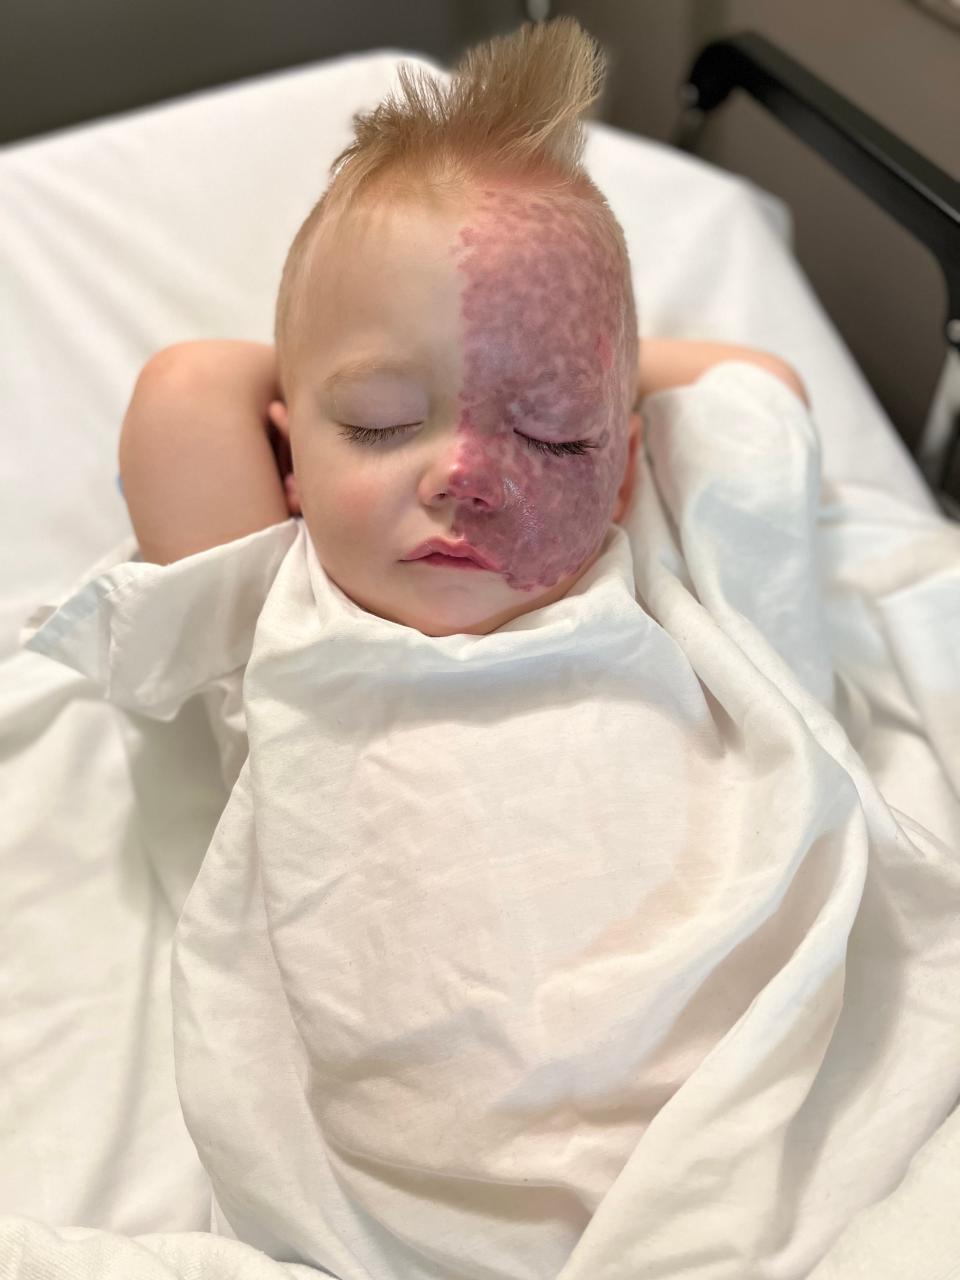 Tucker Lewis rests during one of his infant hospital stays in this undated photo. Now age 4, he has undergone 20 laser treatments on his port-wine stain birthmark. The laser treatment helps preserve the skin.